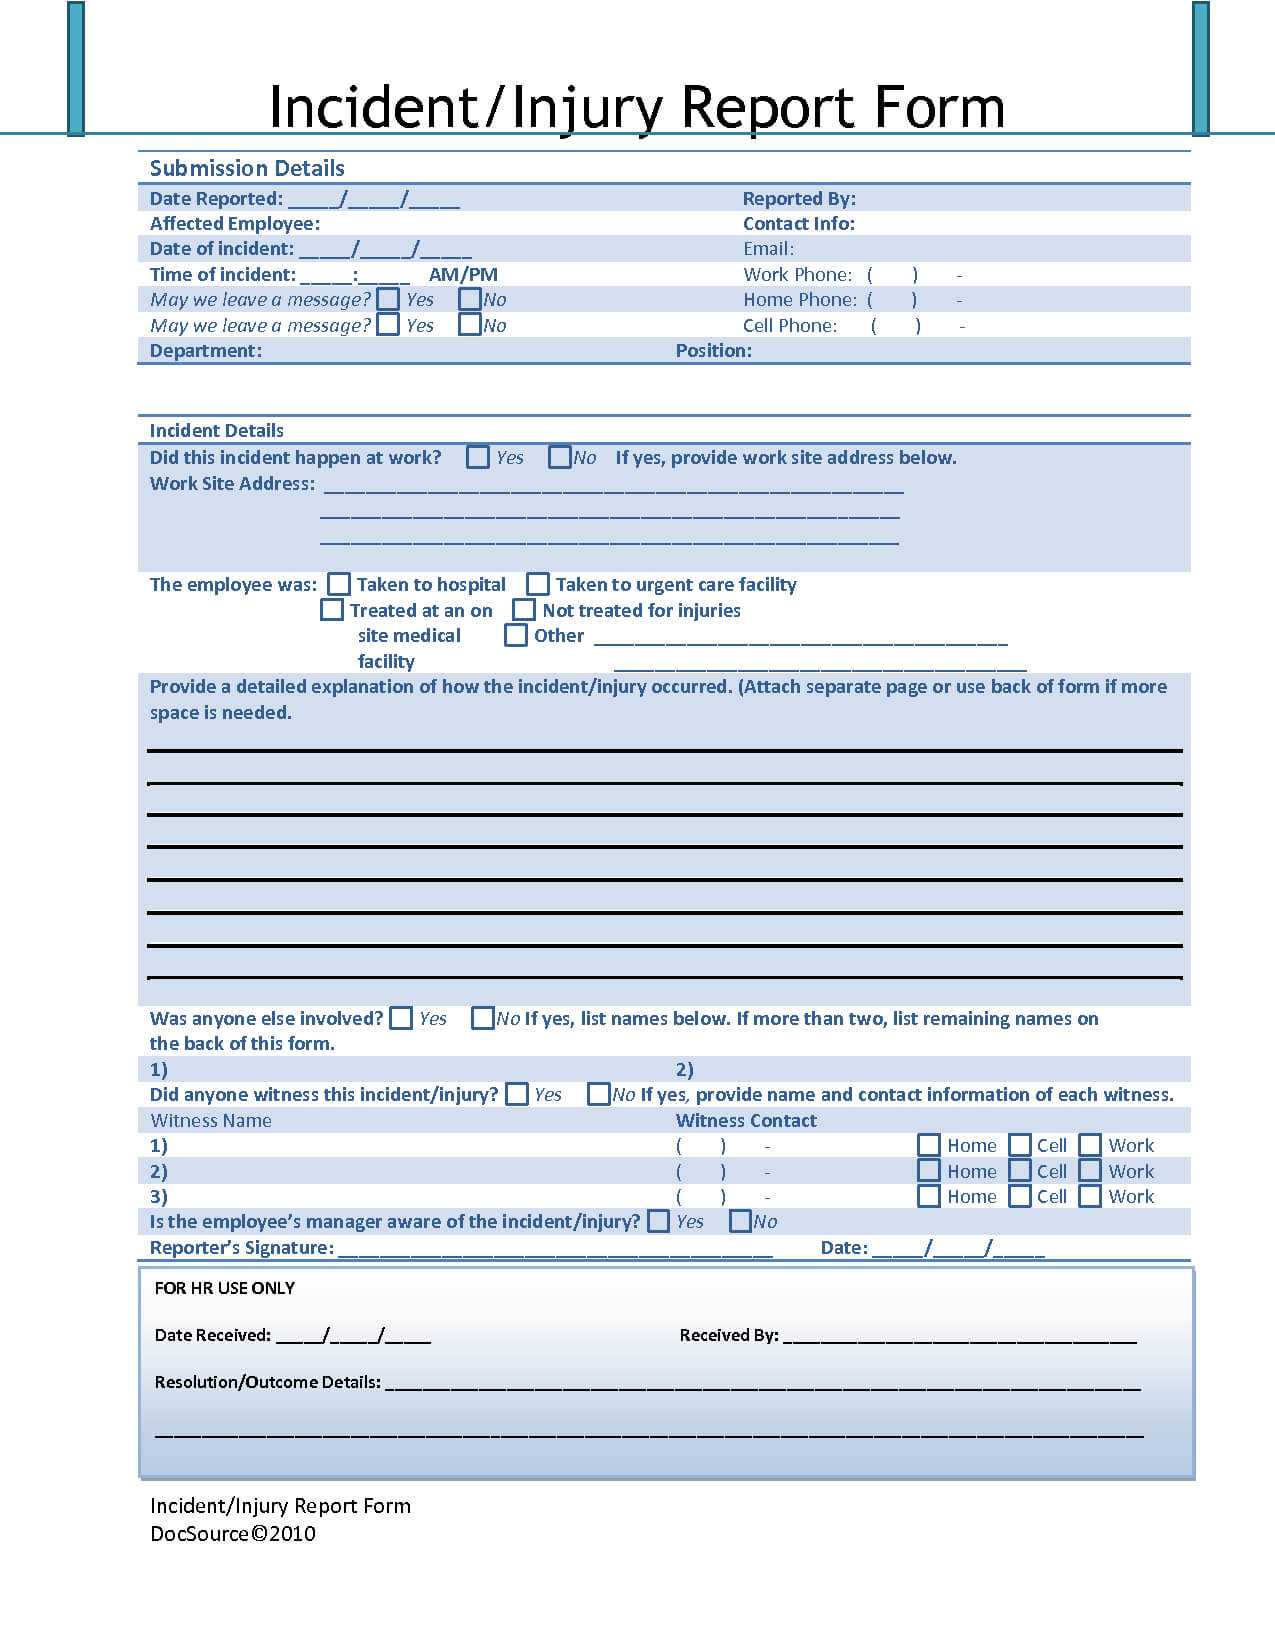 Employee Nt Report Form Pdf Hse Template Format For Safety Within Health And Safety Incident Report Form Template